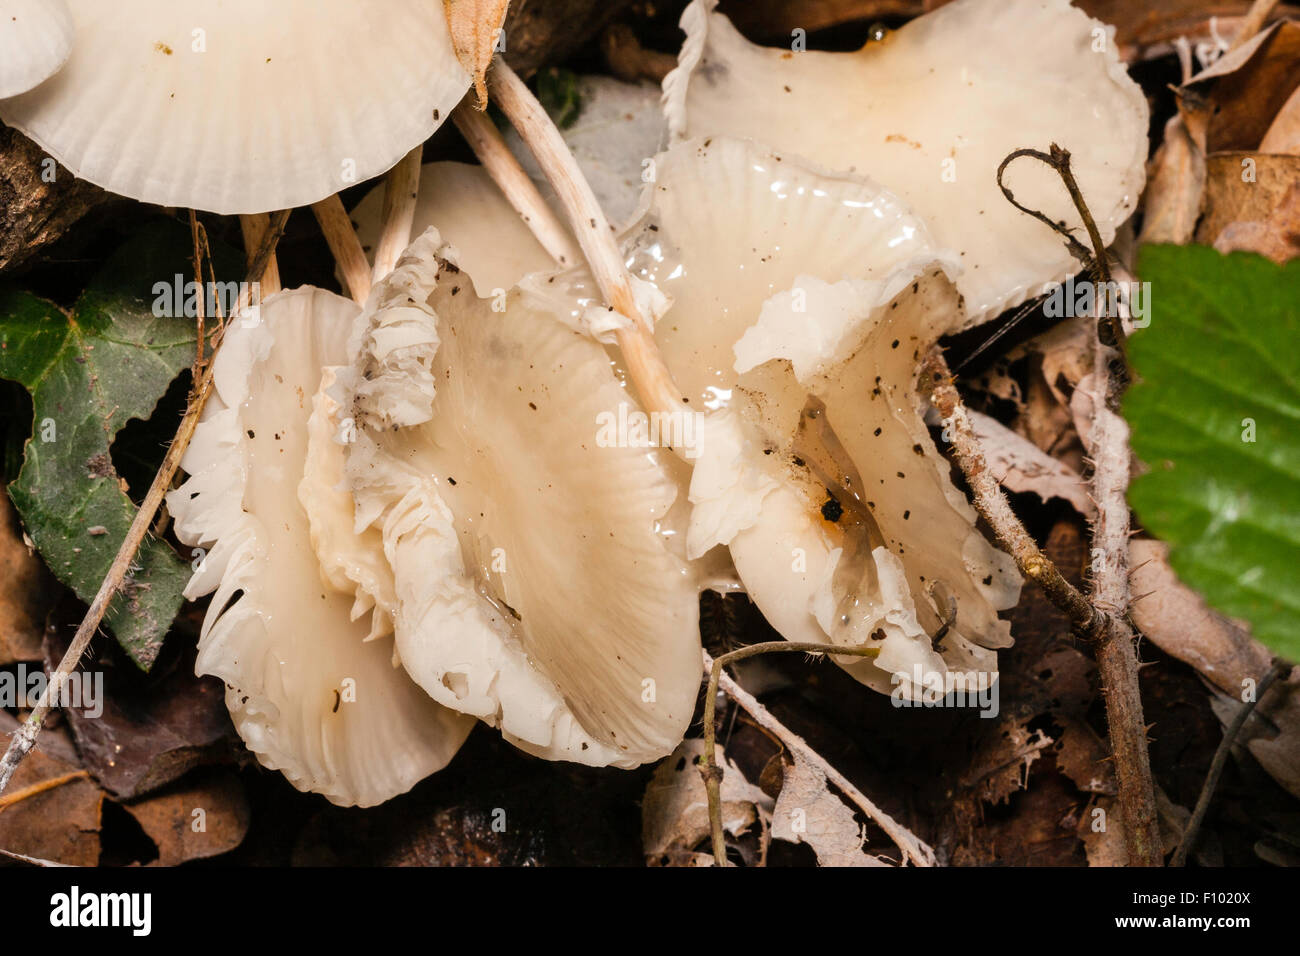 Macro shot of light brown, cream coloured shiny toadstools growing on side of fallen tree branch. Porcellain Fungus, Oudemansiella mucida. Stock Photo